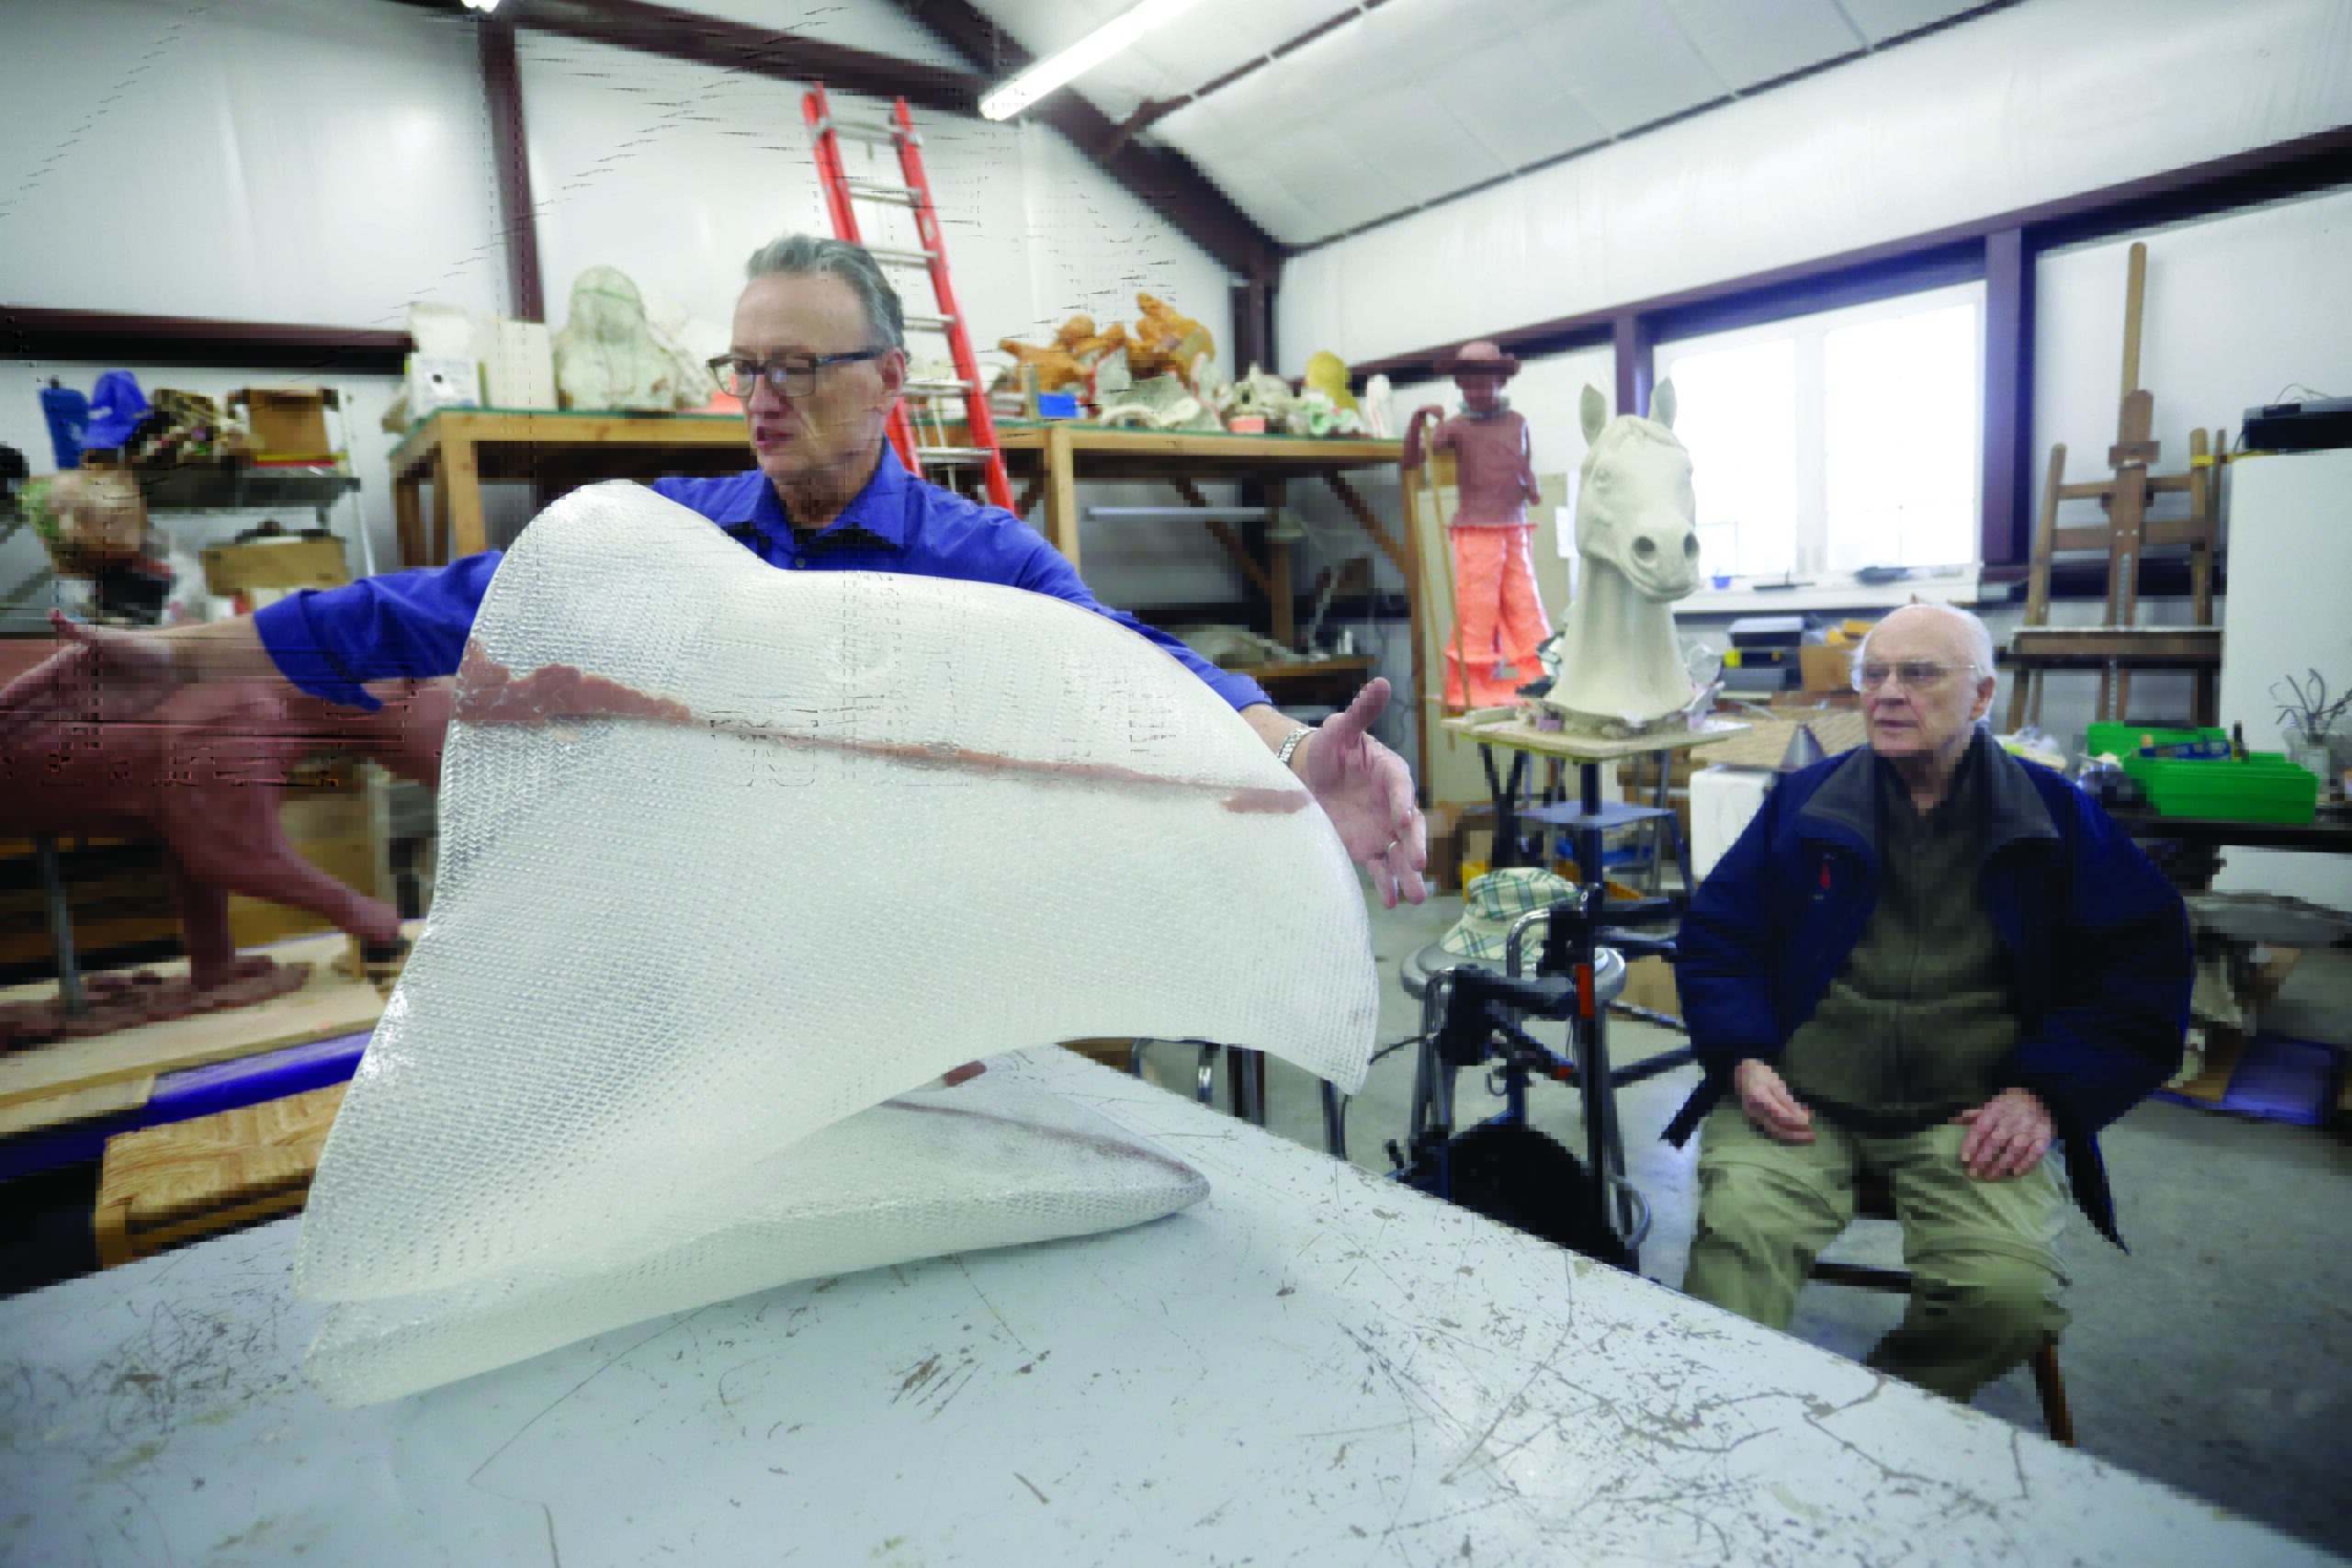 Artist Robin Richerson explains the ancient “Lost-Wax” Casting Method the design team employed to create the monuments. Due to the size of the monuments, each Jayhawk was cast in multiple pieces and then welded together. Here, the head and beak of the 1929 Jayhawk has been removed from its ceramic shell. 

Photo by Mike Yoder